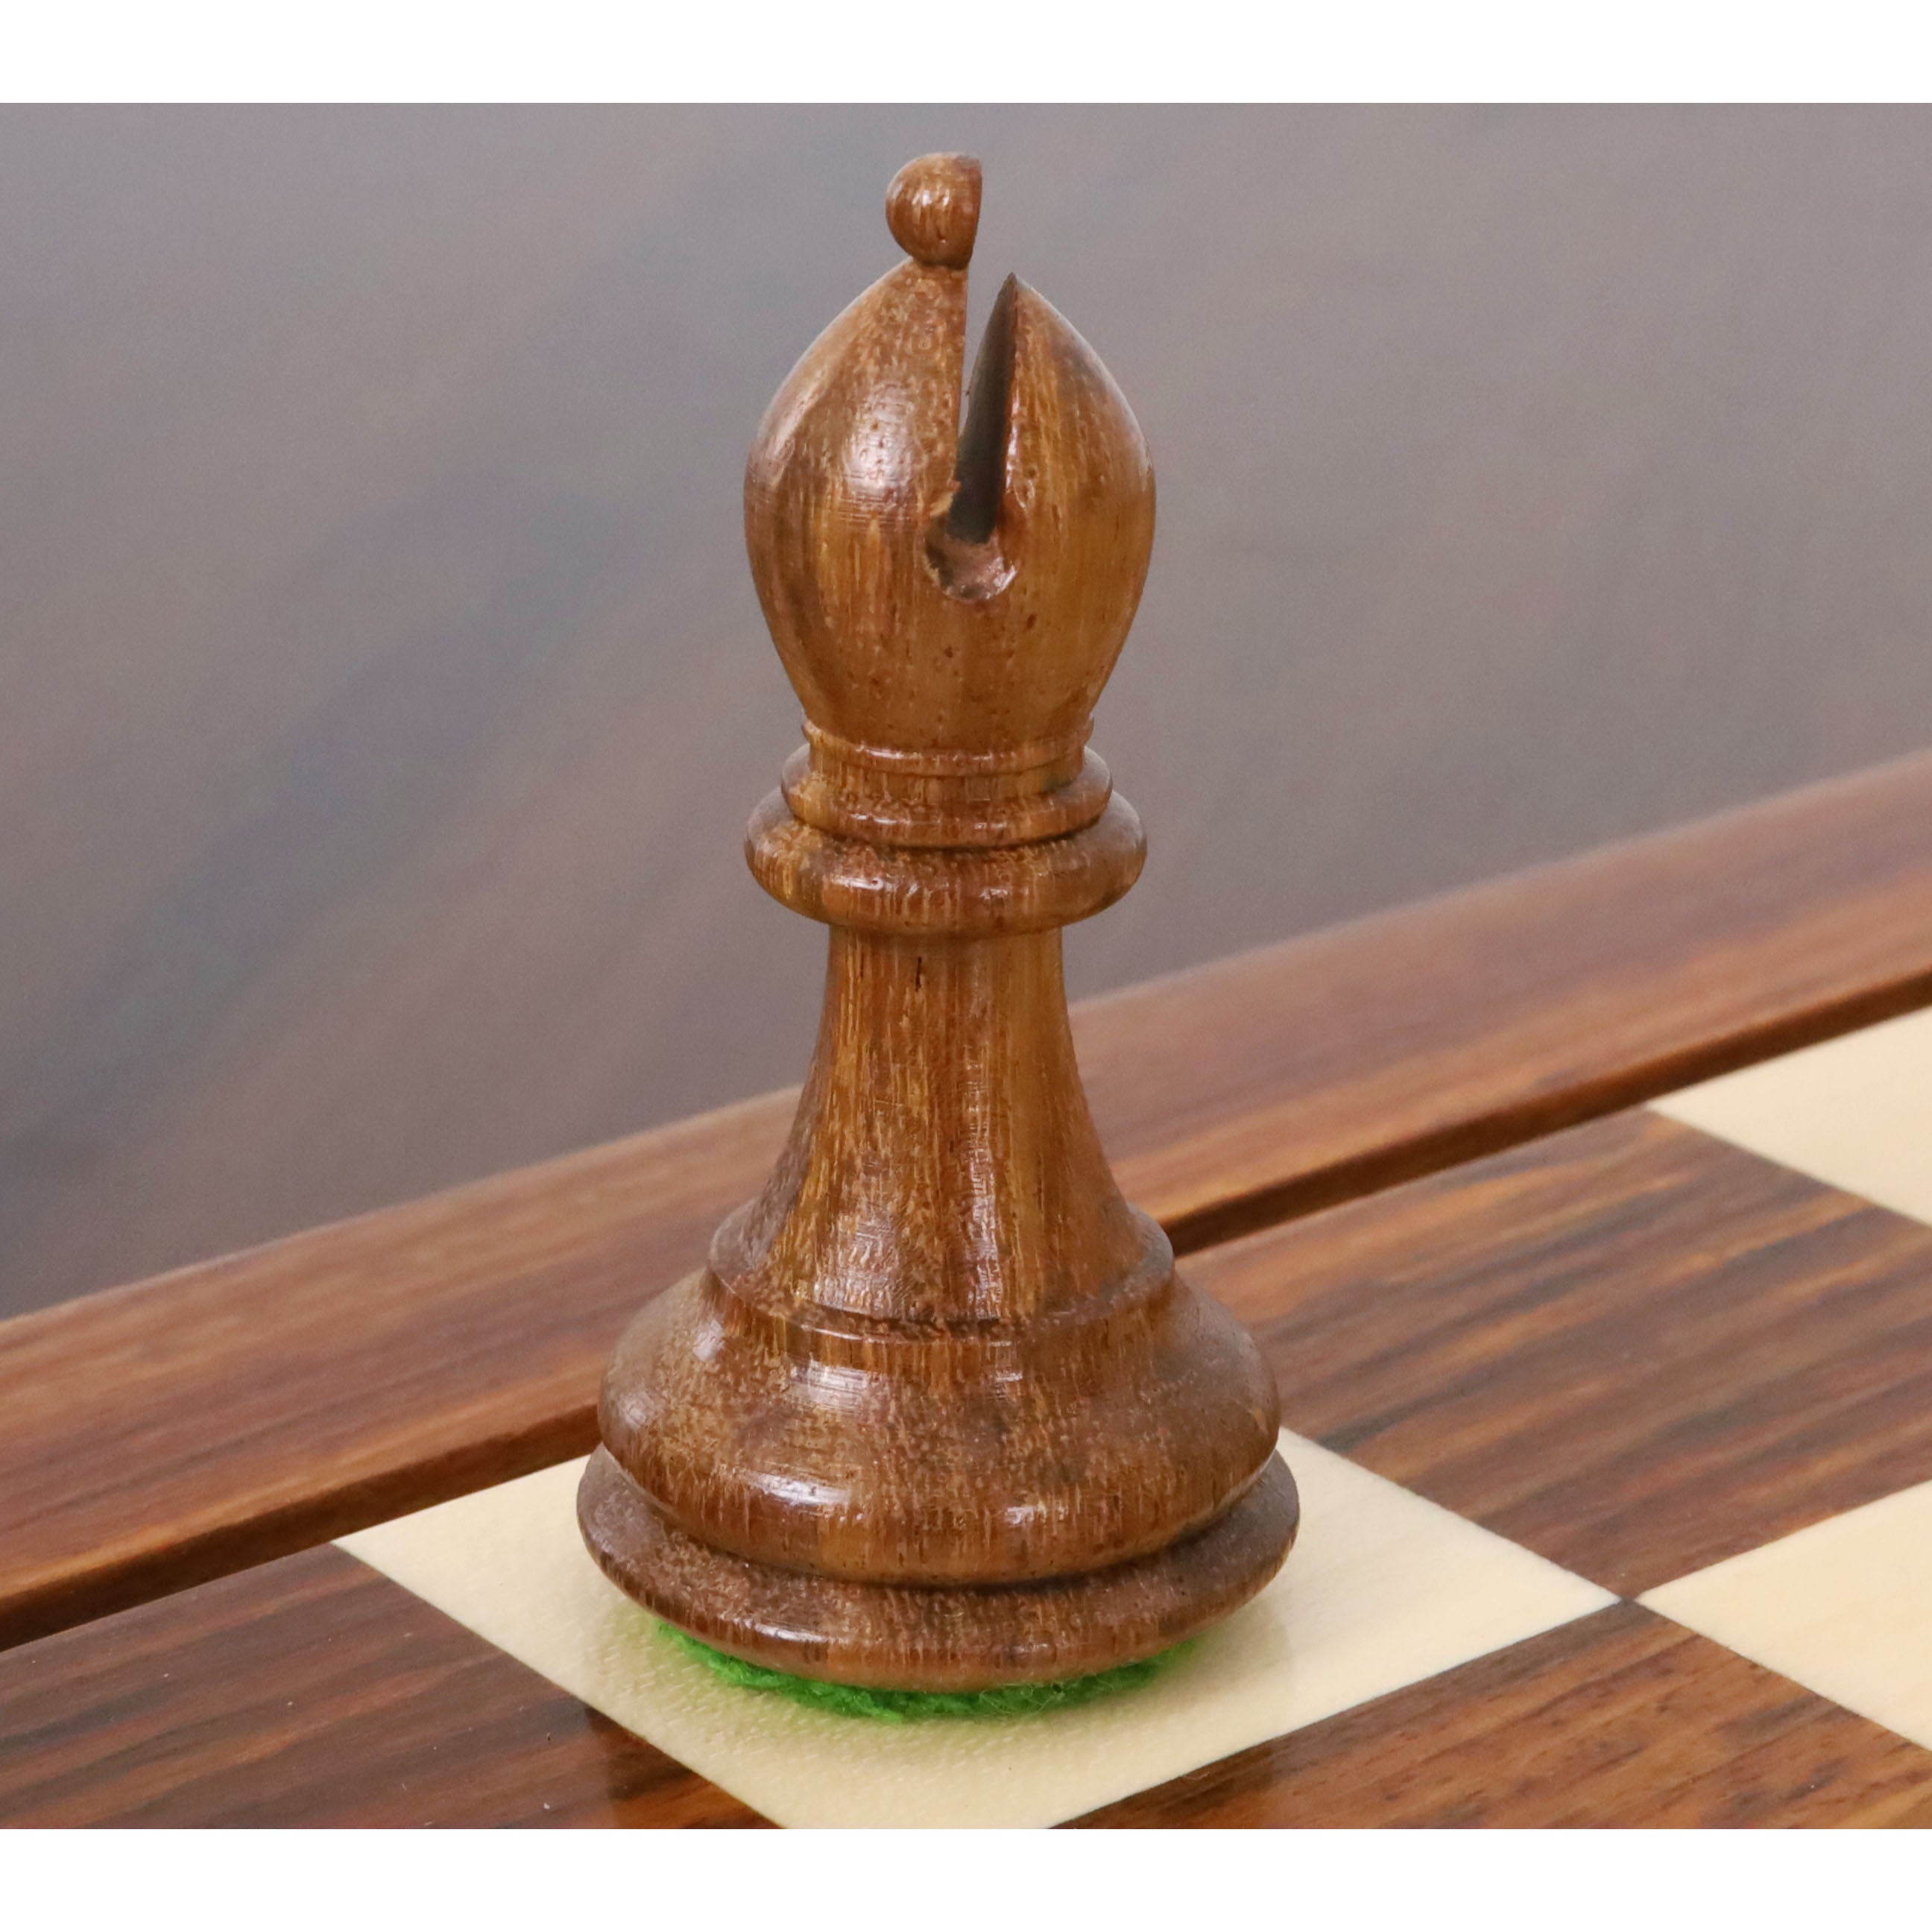 Black Stained French Staunton Wood Chess Pieces - Weighted - King measures  3 in.